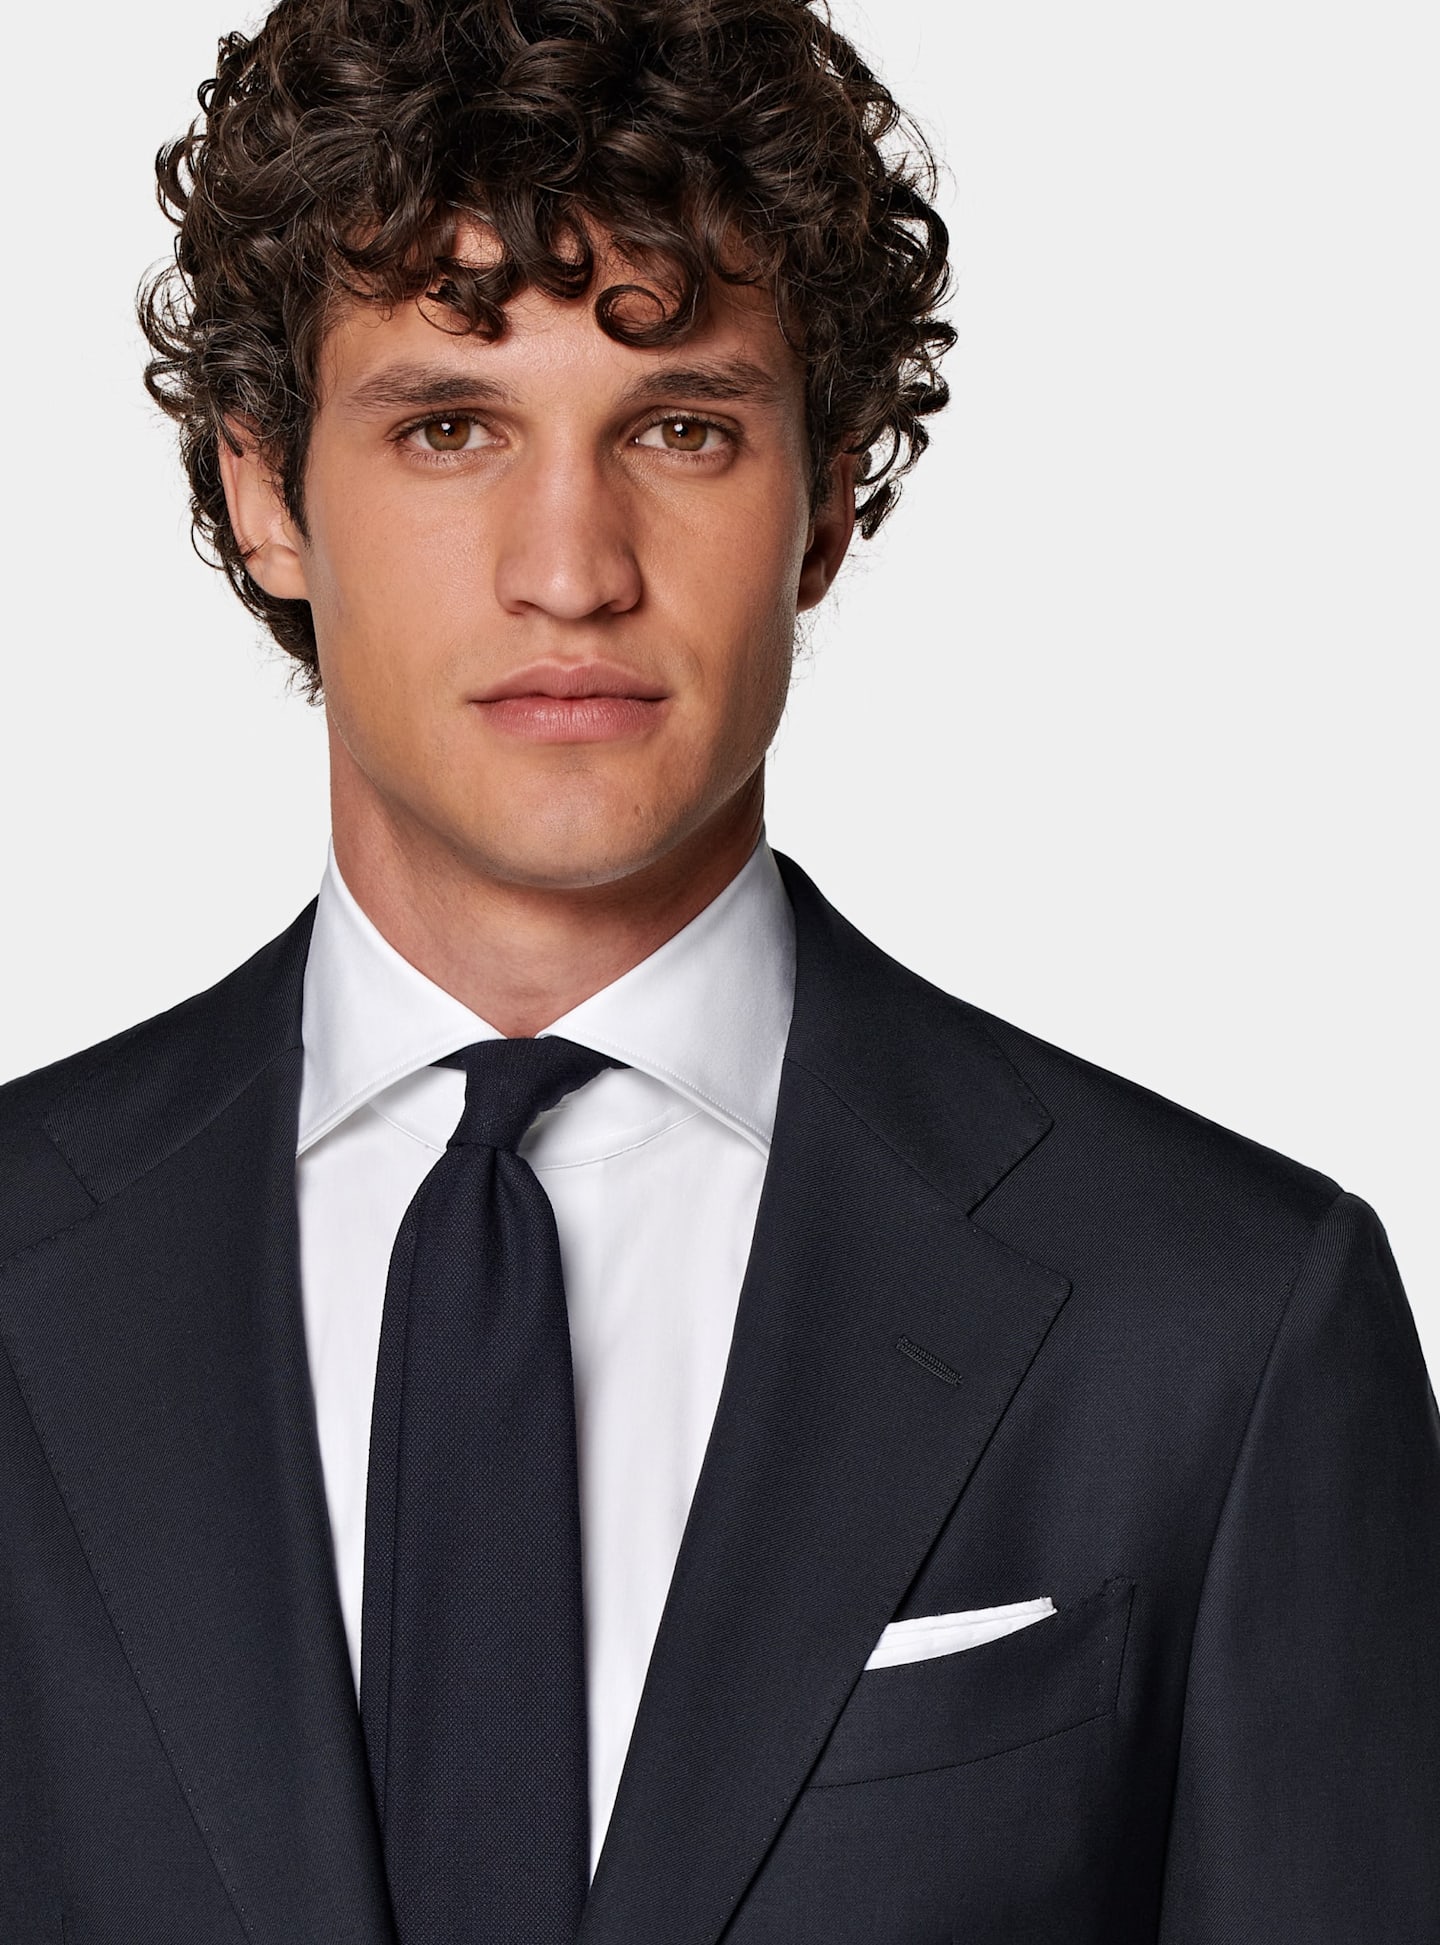 Detail of black two-piece suit with white shirt, black tie, and white pocket square.